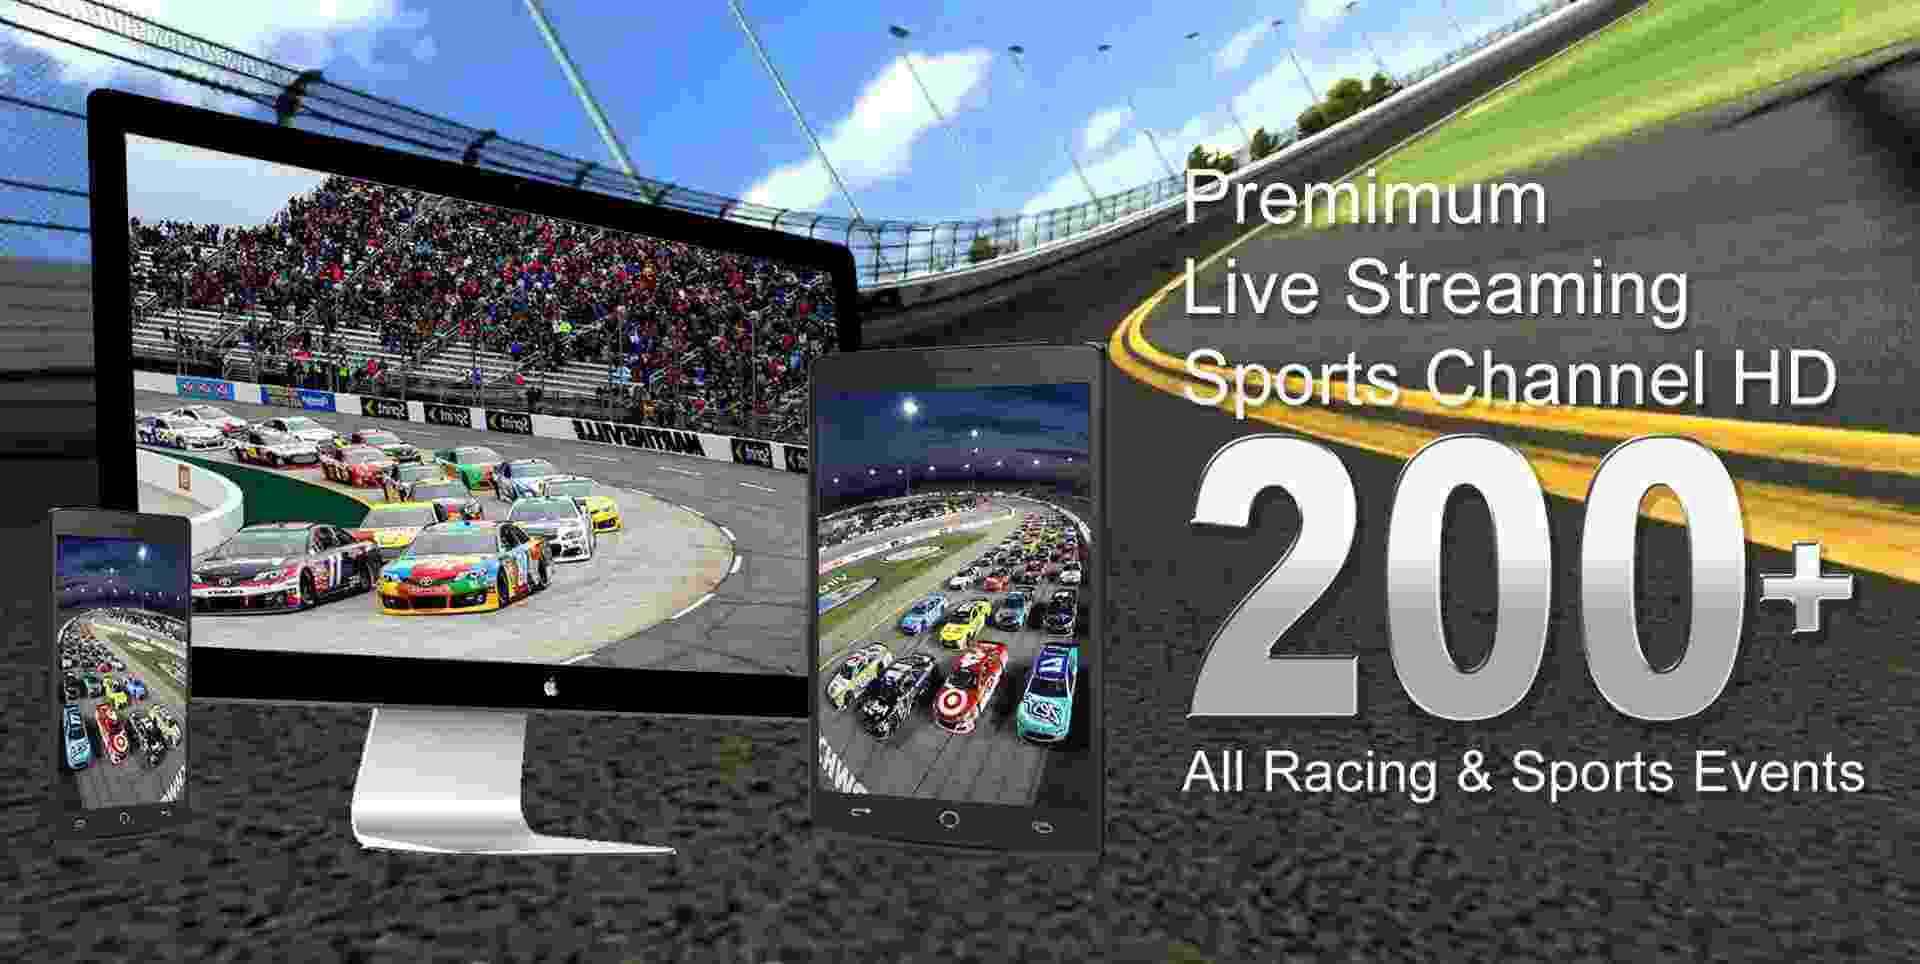 2015 Camping World 500 Race Live